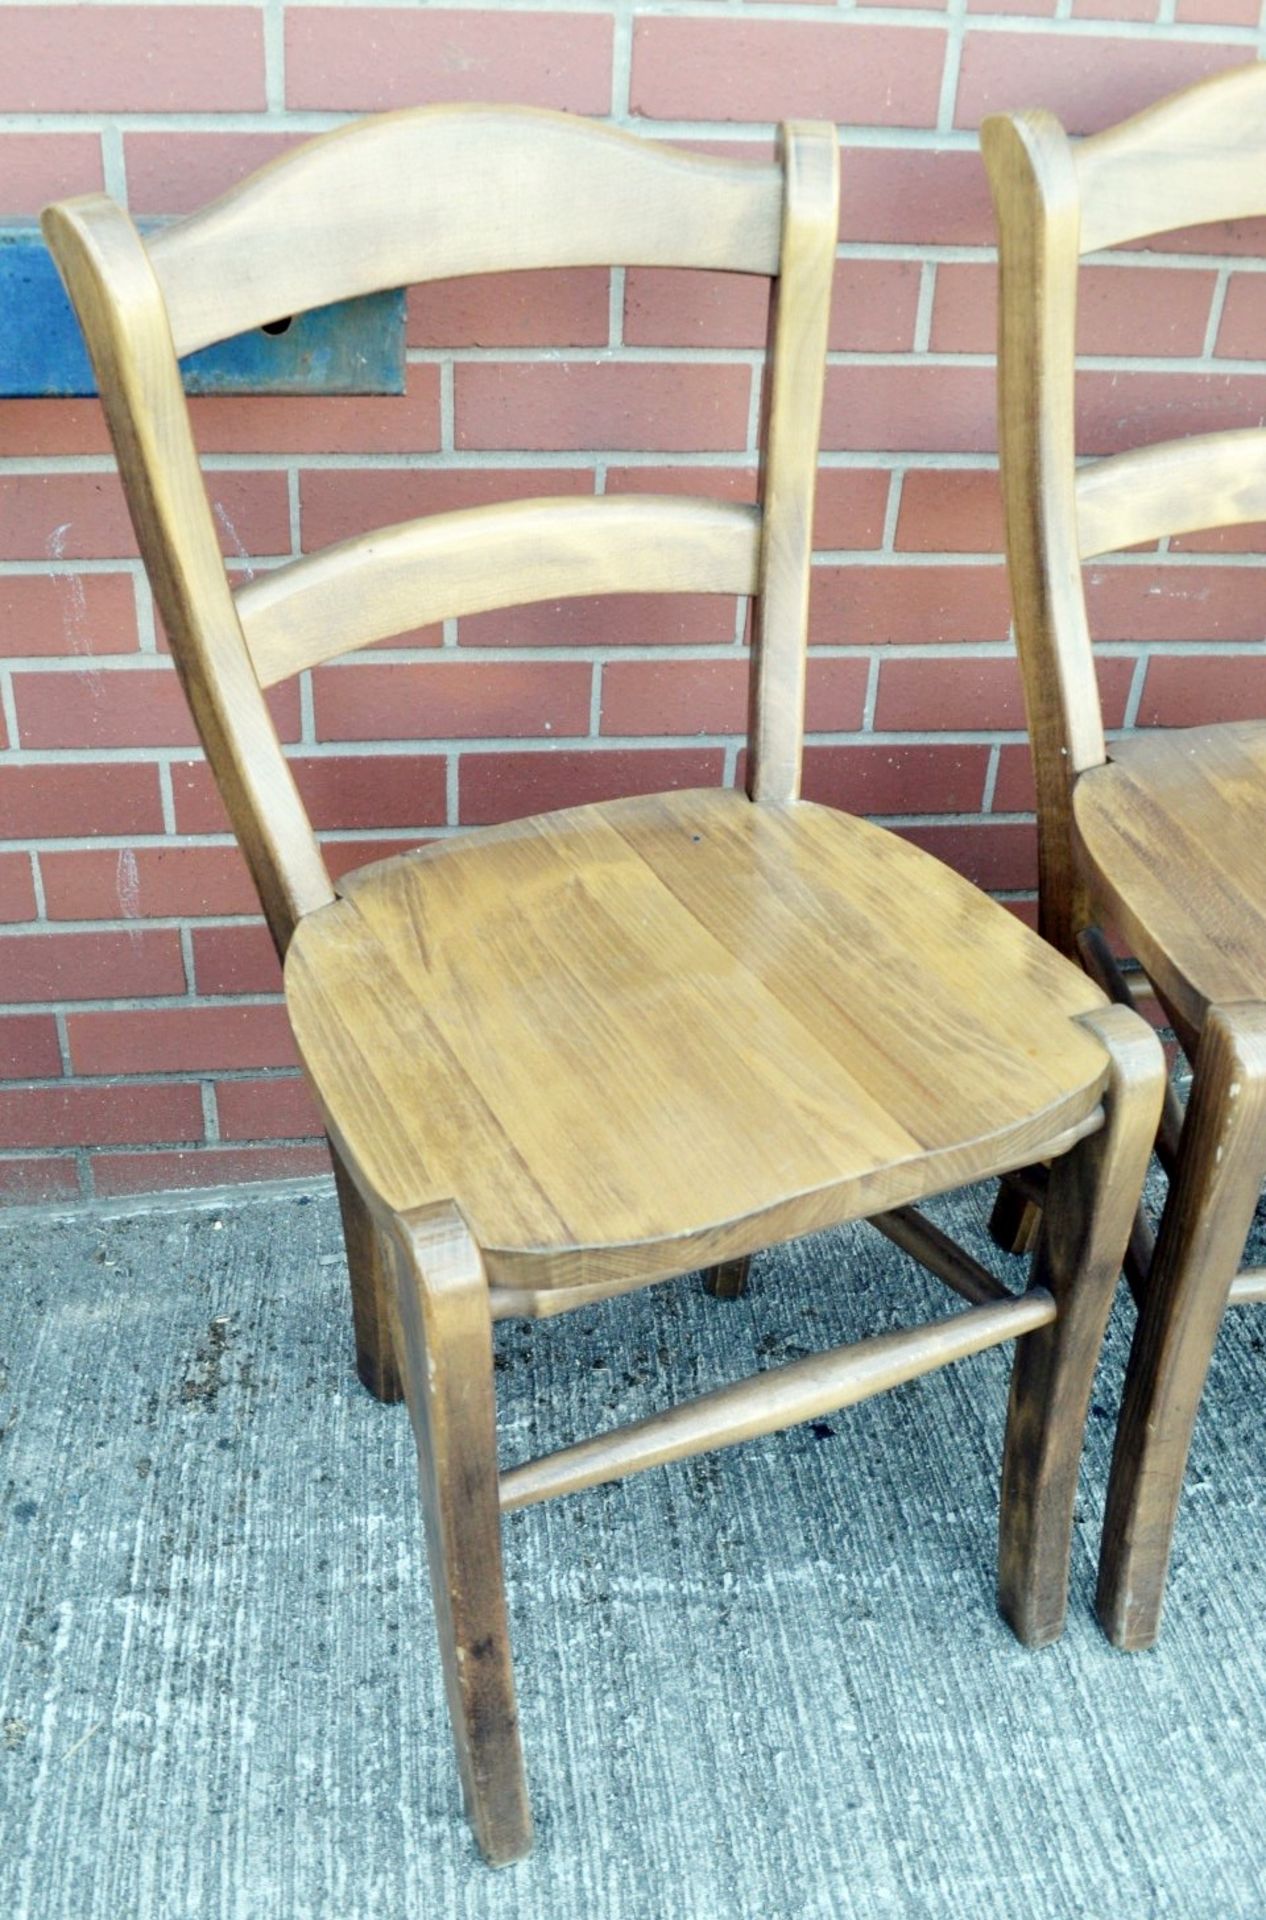 3 x Matching Sturdy Solid Wood Chairs With An Attractive Varnished Finish - Dimensions: H90 x W47 - Image 2 of 6